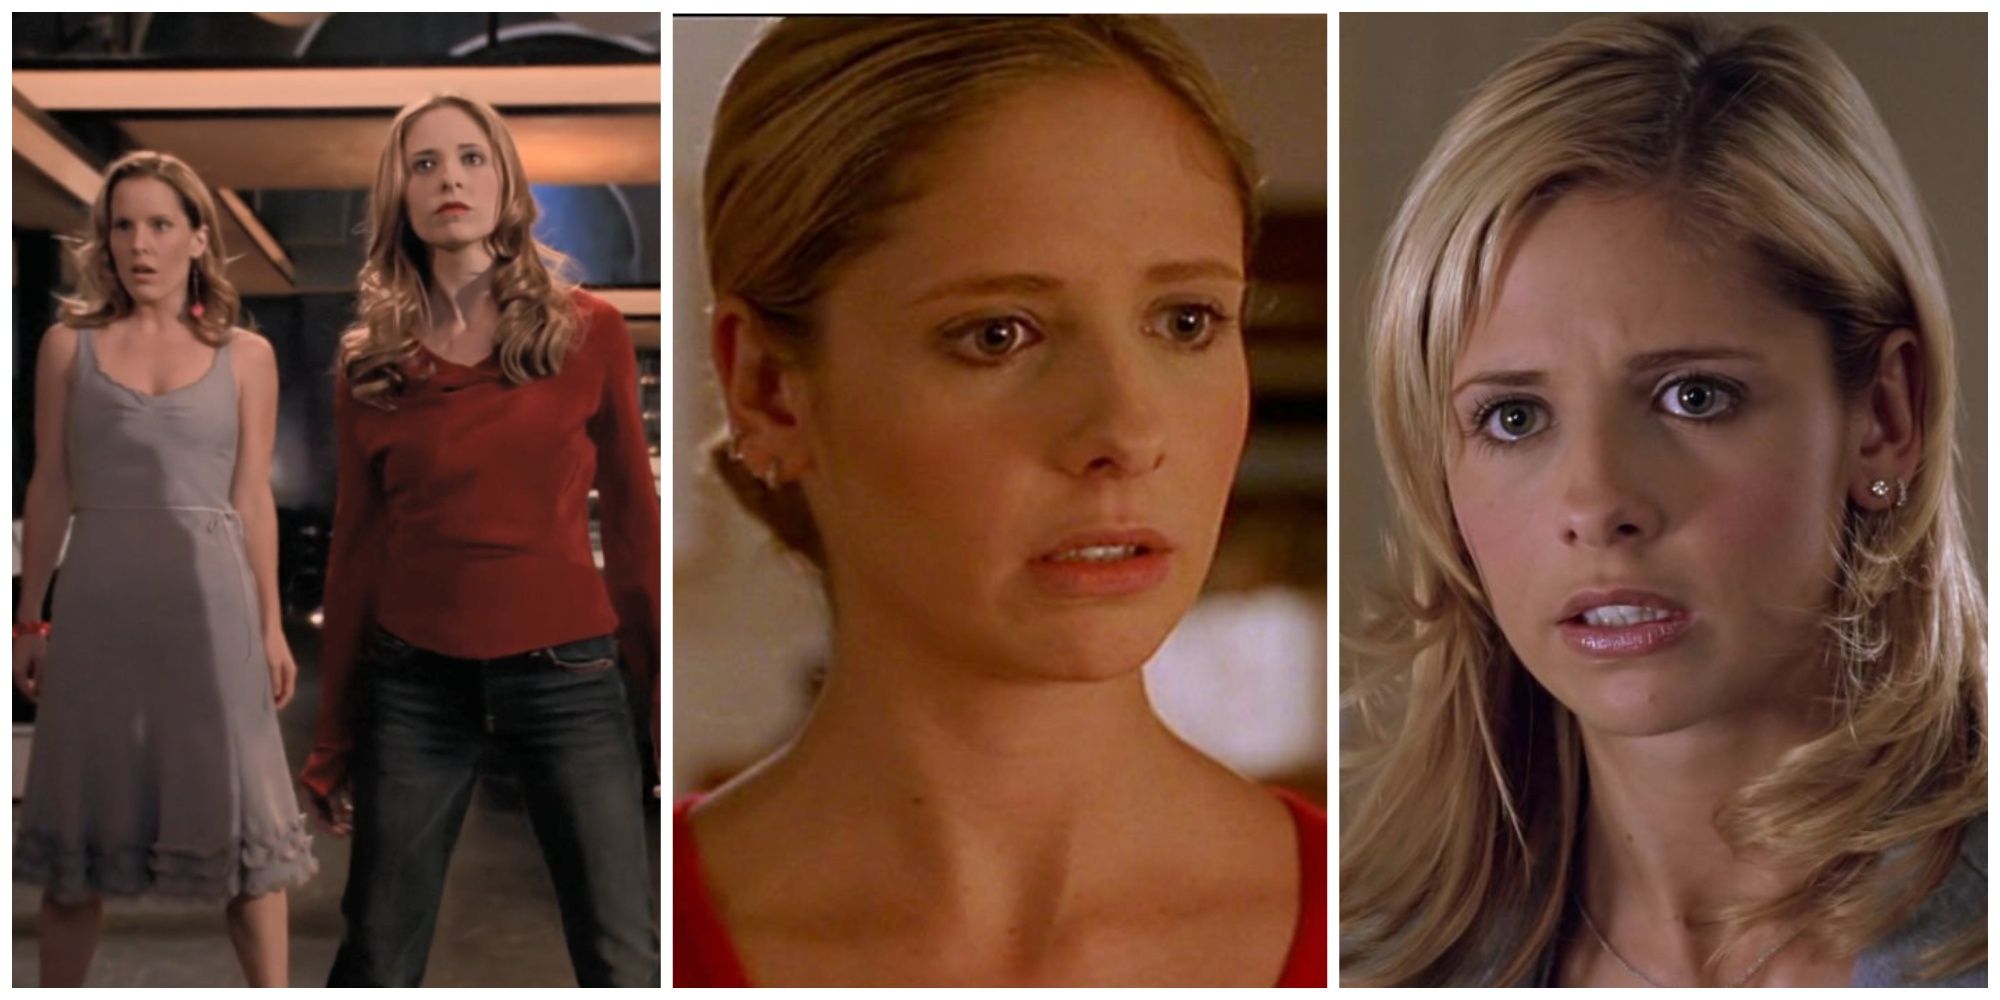 Split image showing the Buffy the Vampire Slayer episodes 